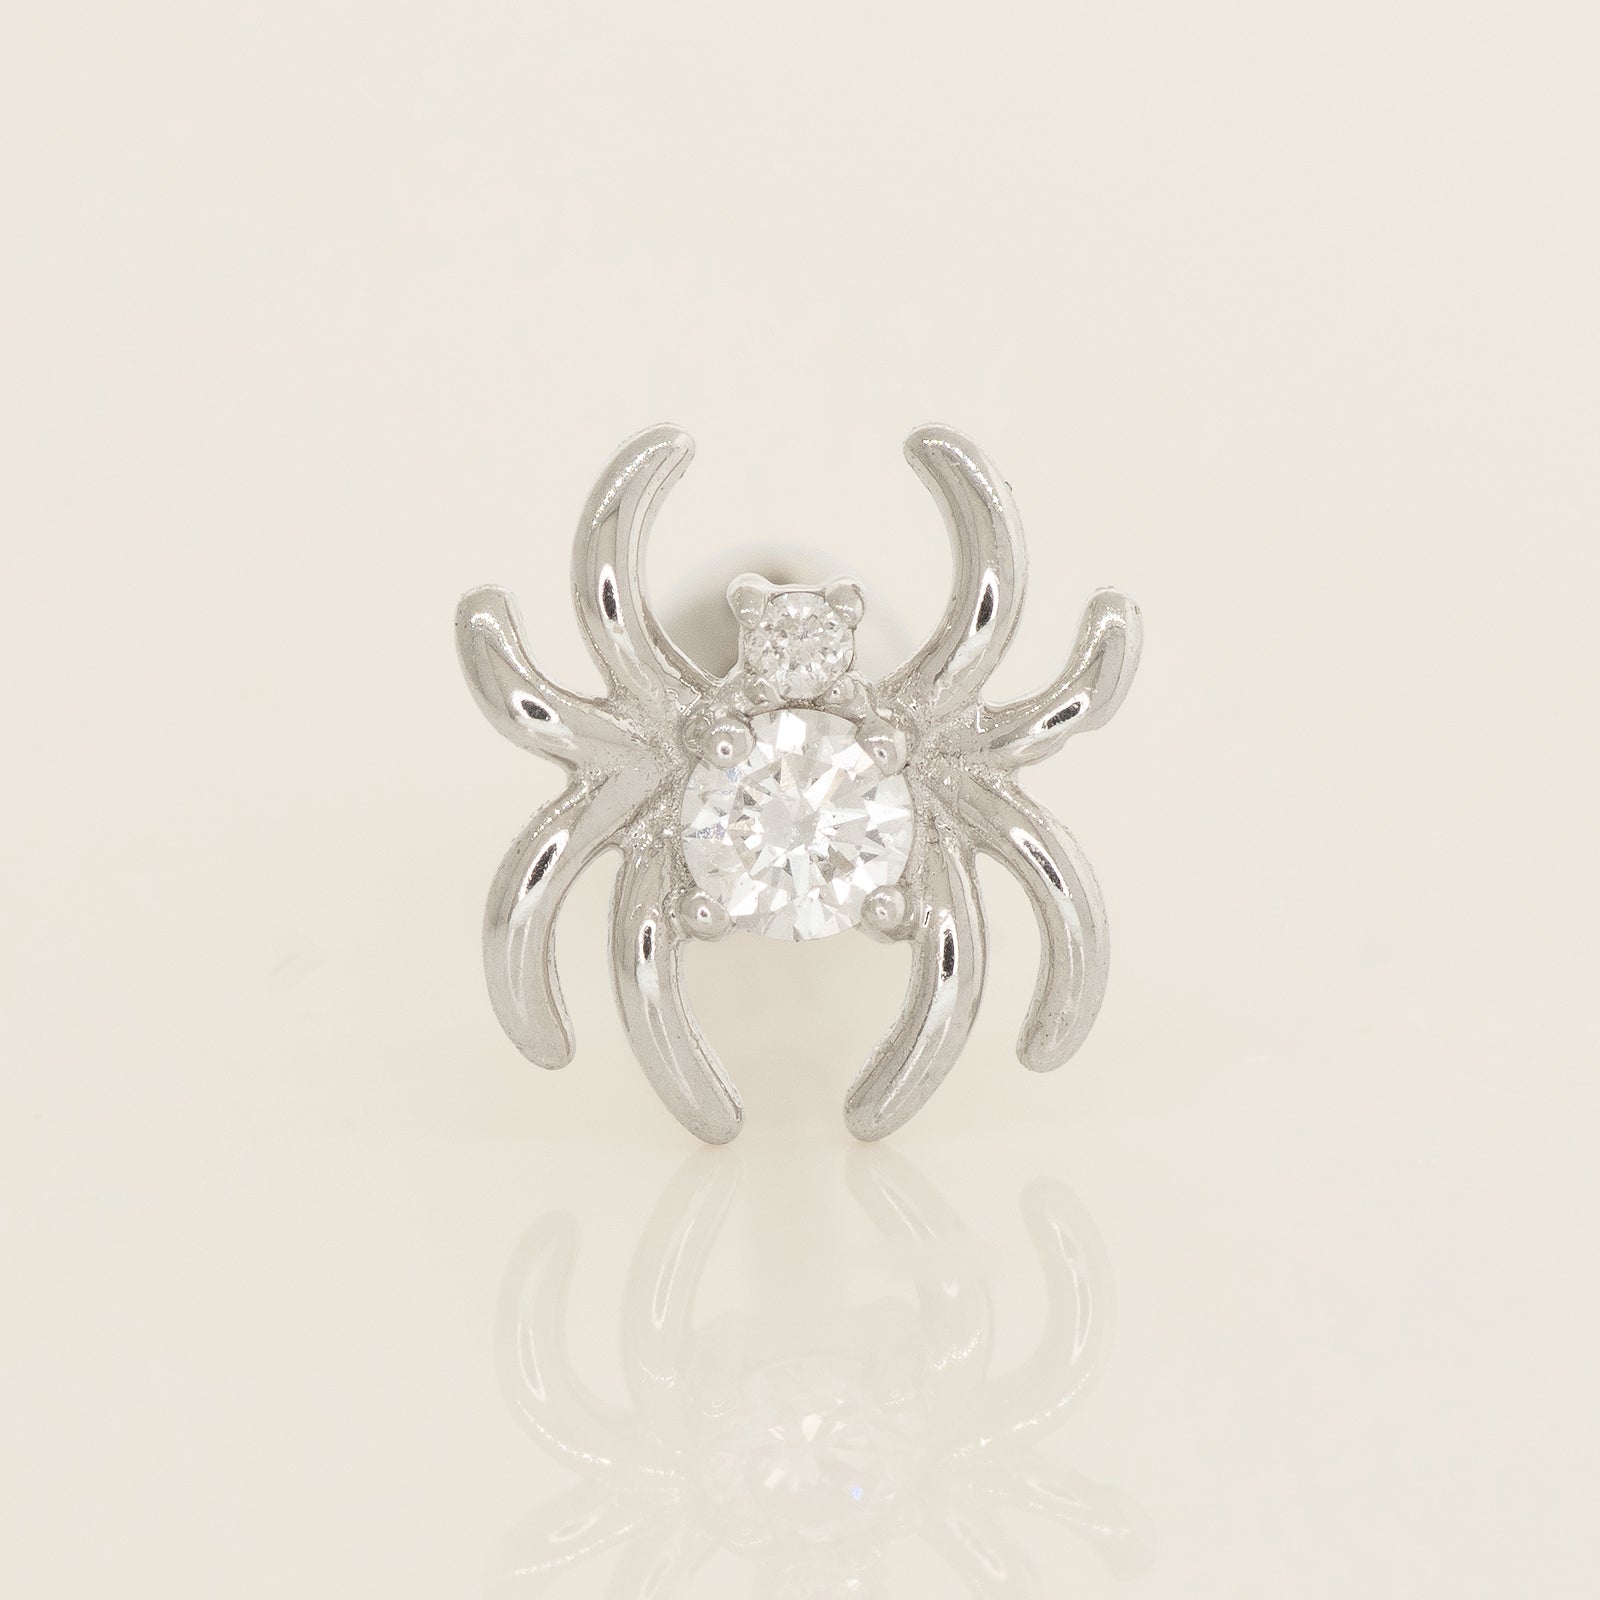 14k White Gold Spider Ear Piercings with Diamond